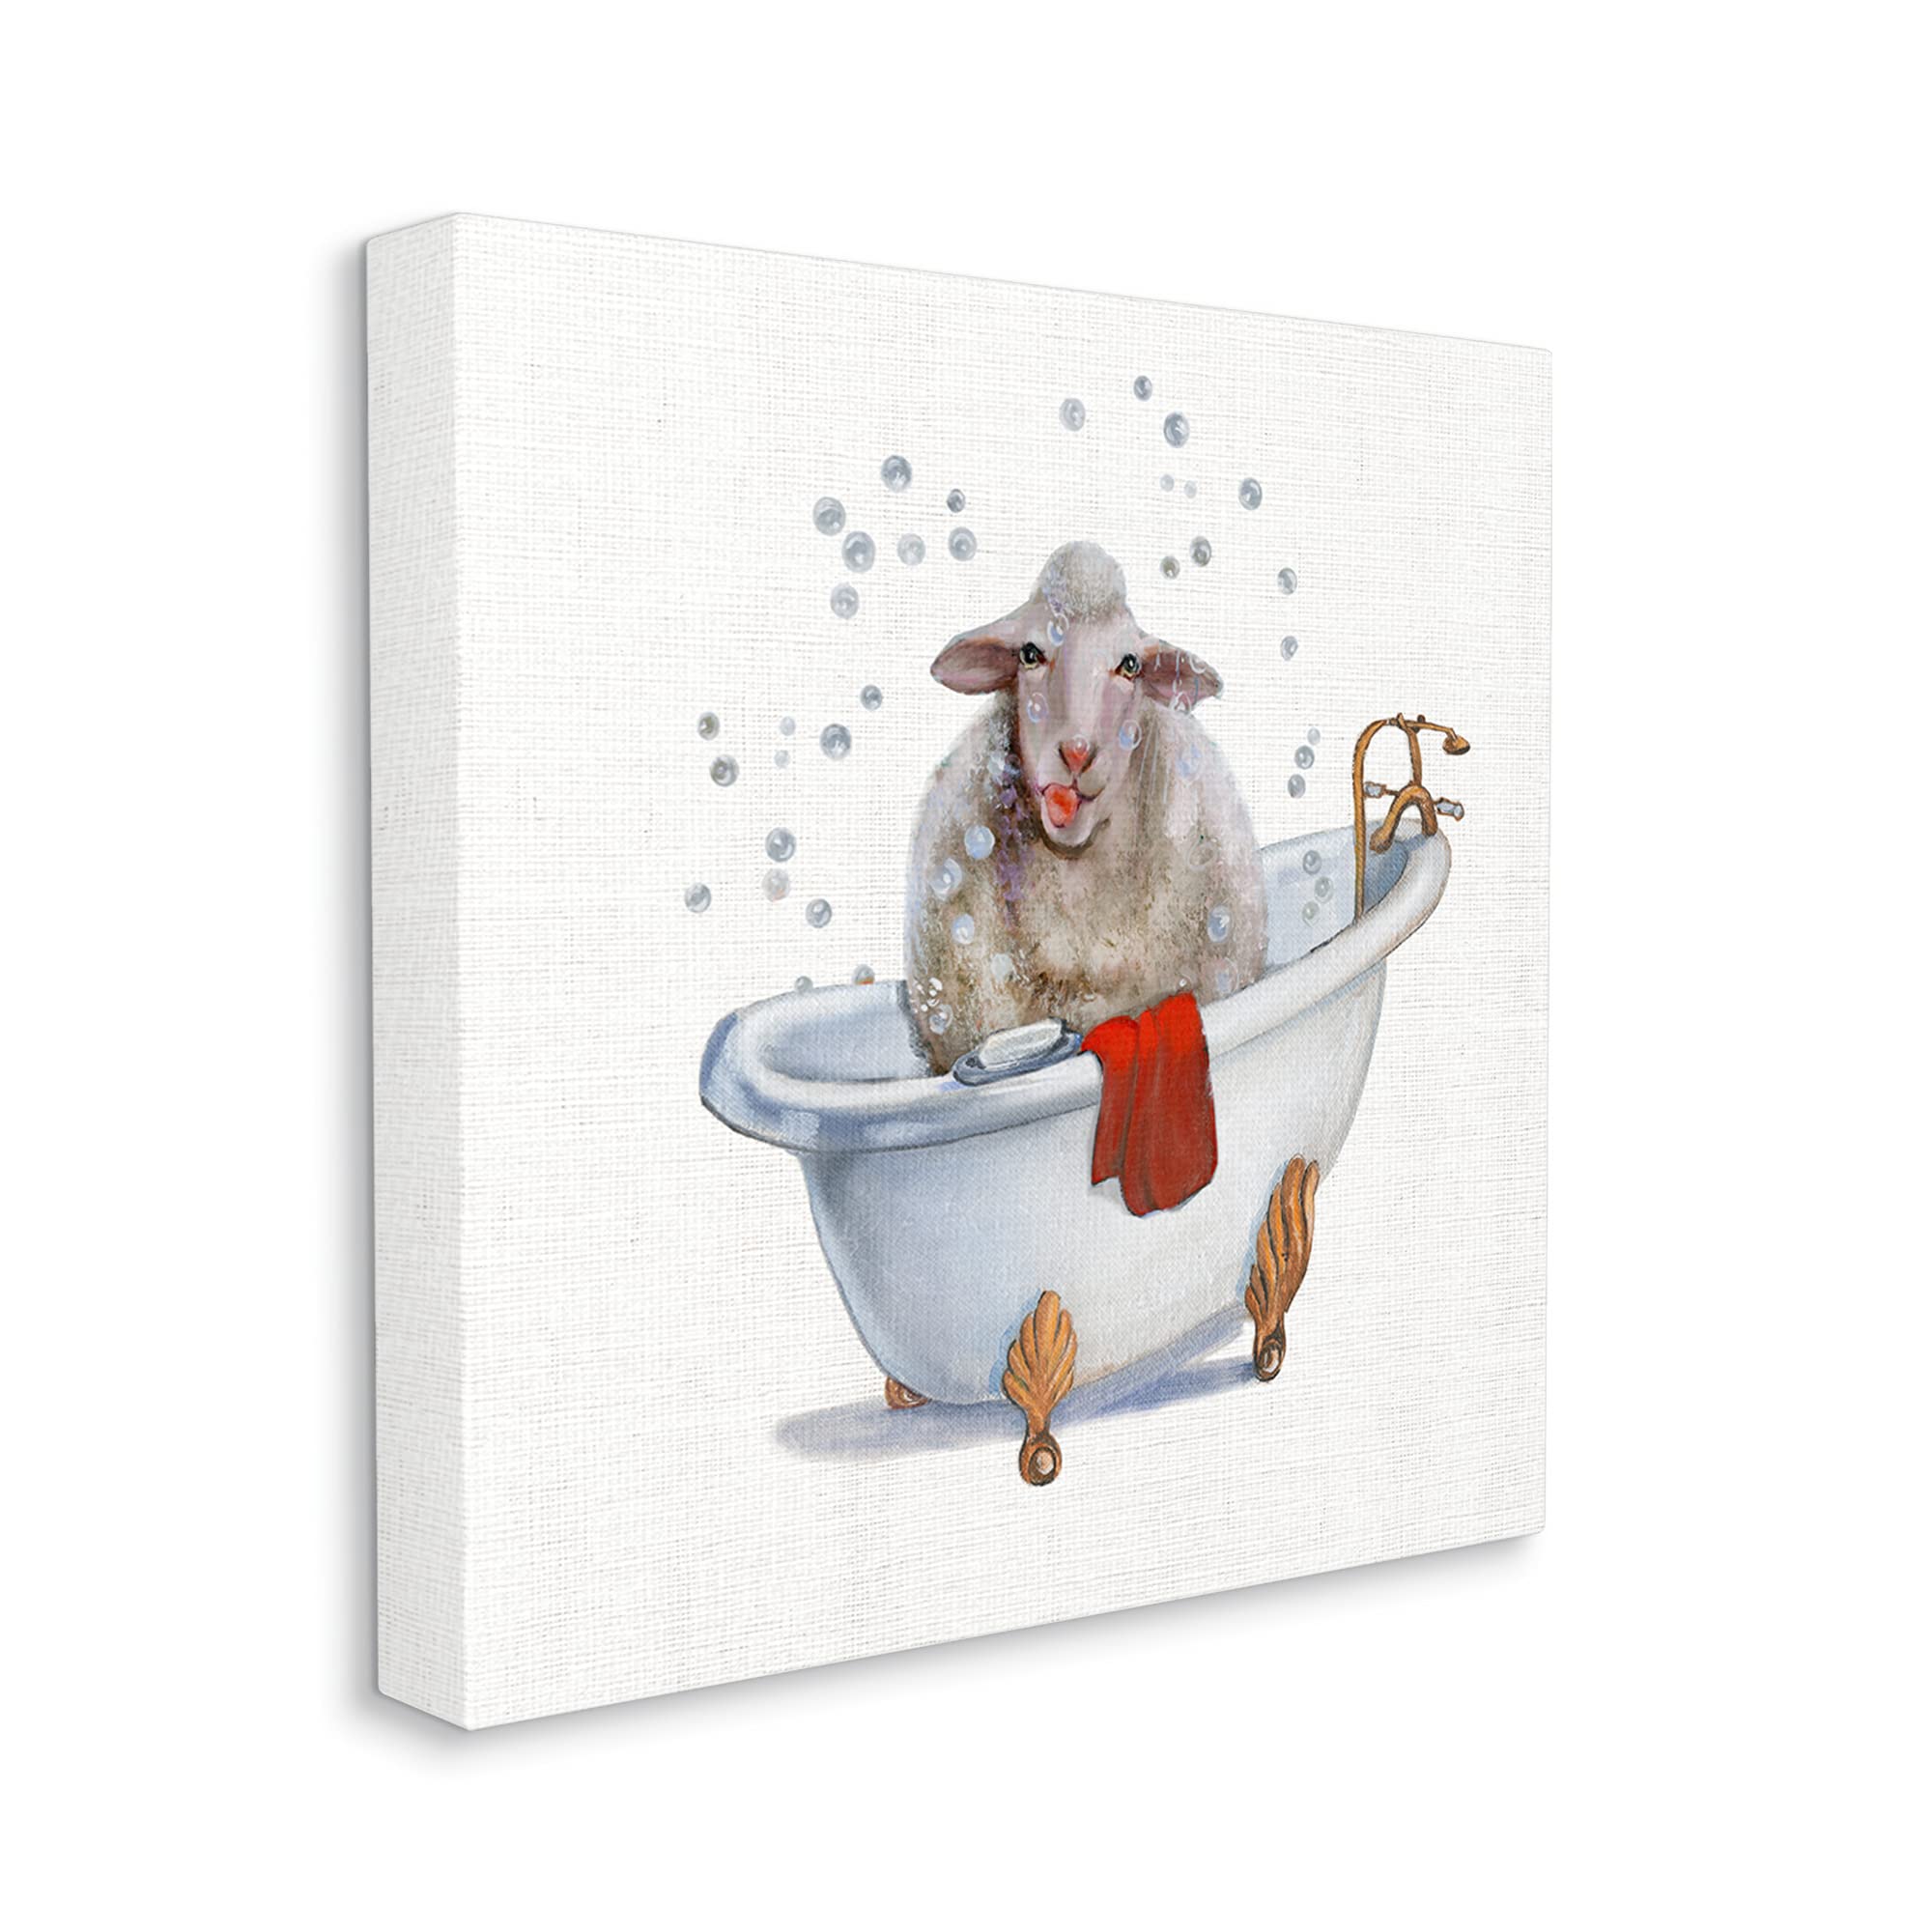 Stupell Industries Shaggy Sheep in Bubble Bath Playful Farm Animal, Designed by Donna Brooks Canvas Wall Art, 17 x 17, Red